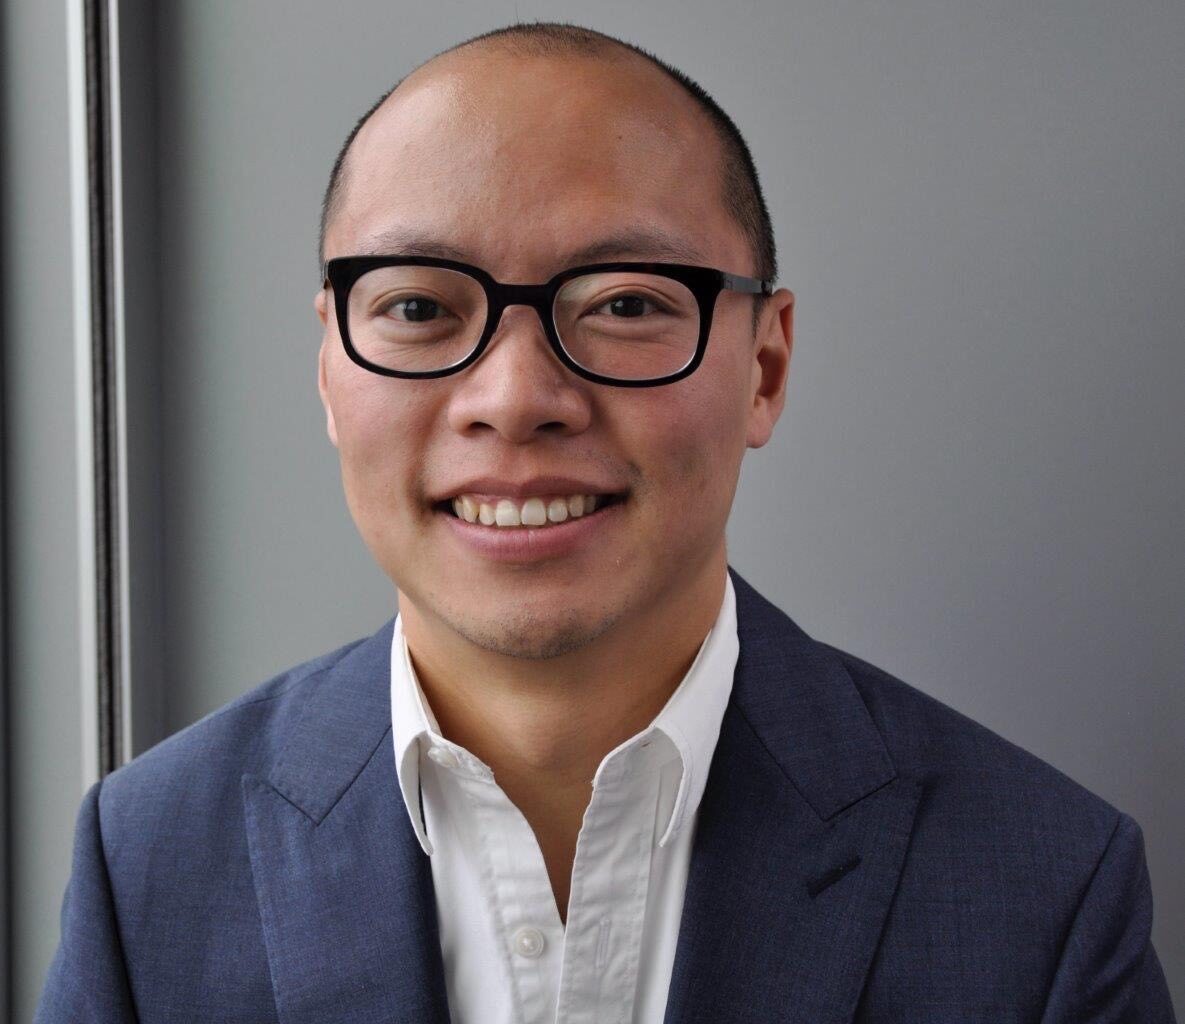 One Degree Welcomes Zhen Liu, Dynamic Leader with Global Experience, to Board of Directors